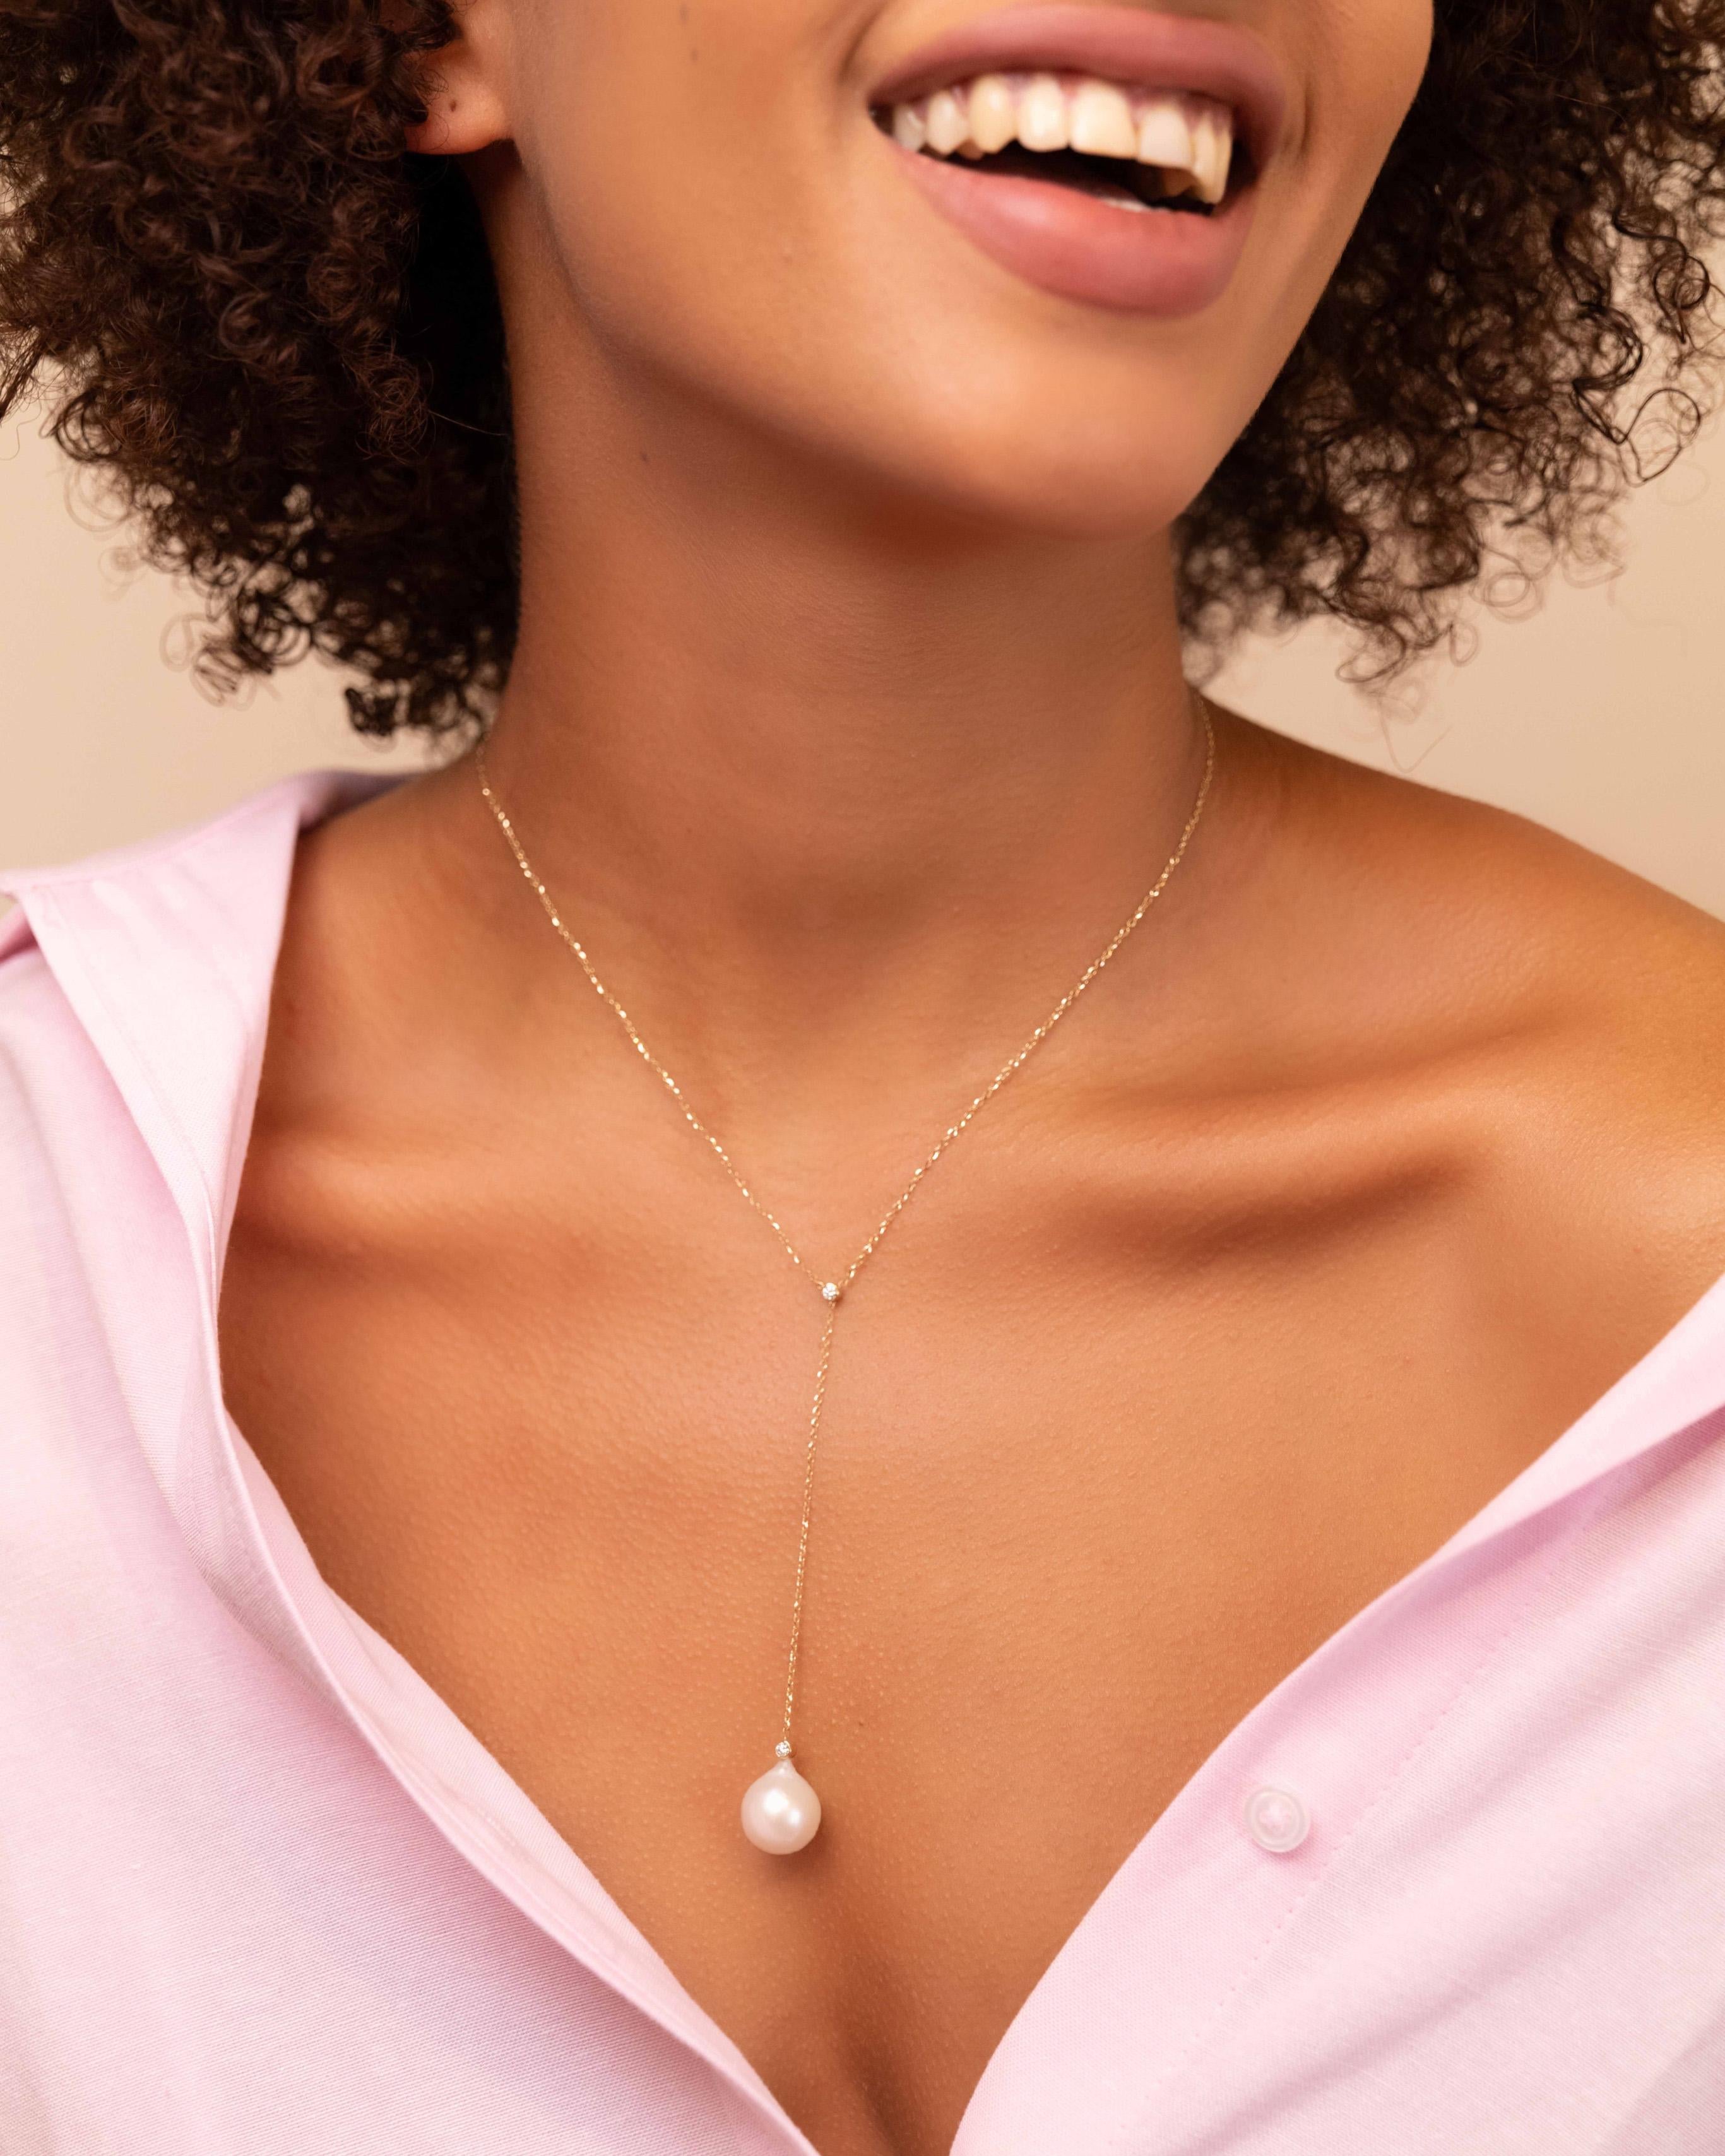 Our lariat necklace features a baroque drop shaped pearl suspended from a sparkly chain and accentuated by two glimmering diamonds. The simplicity in its silhouette combined with the high-quality materials used, make this the ultimate day to night